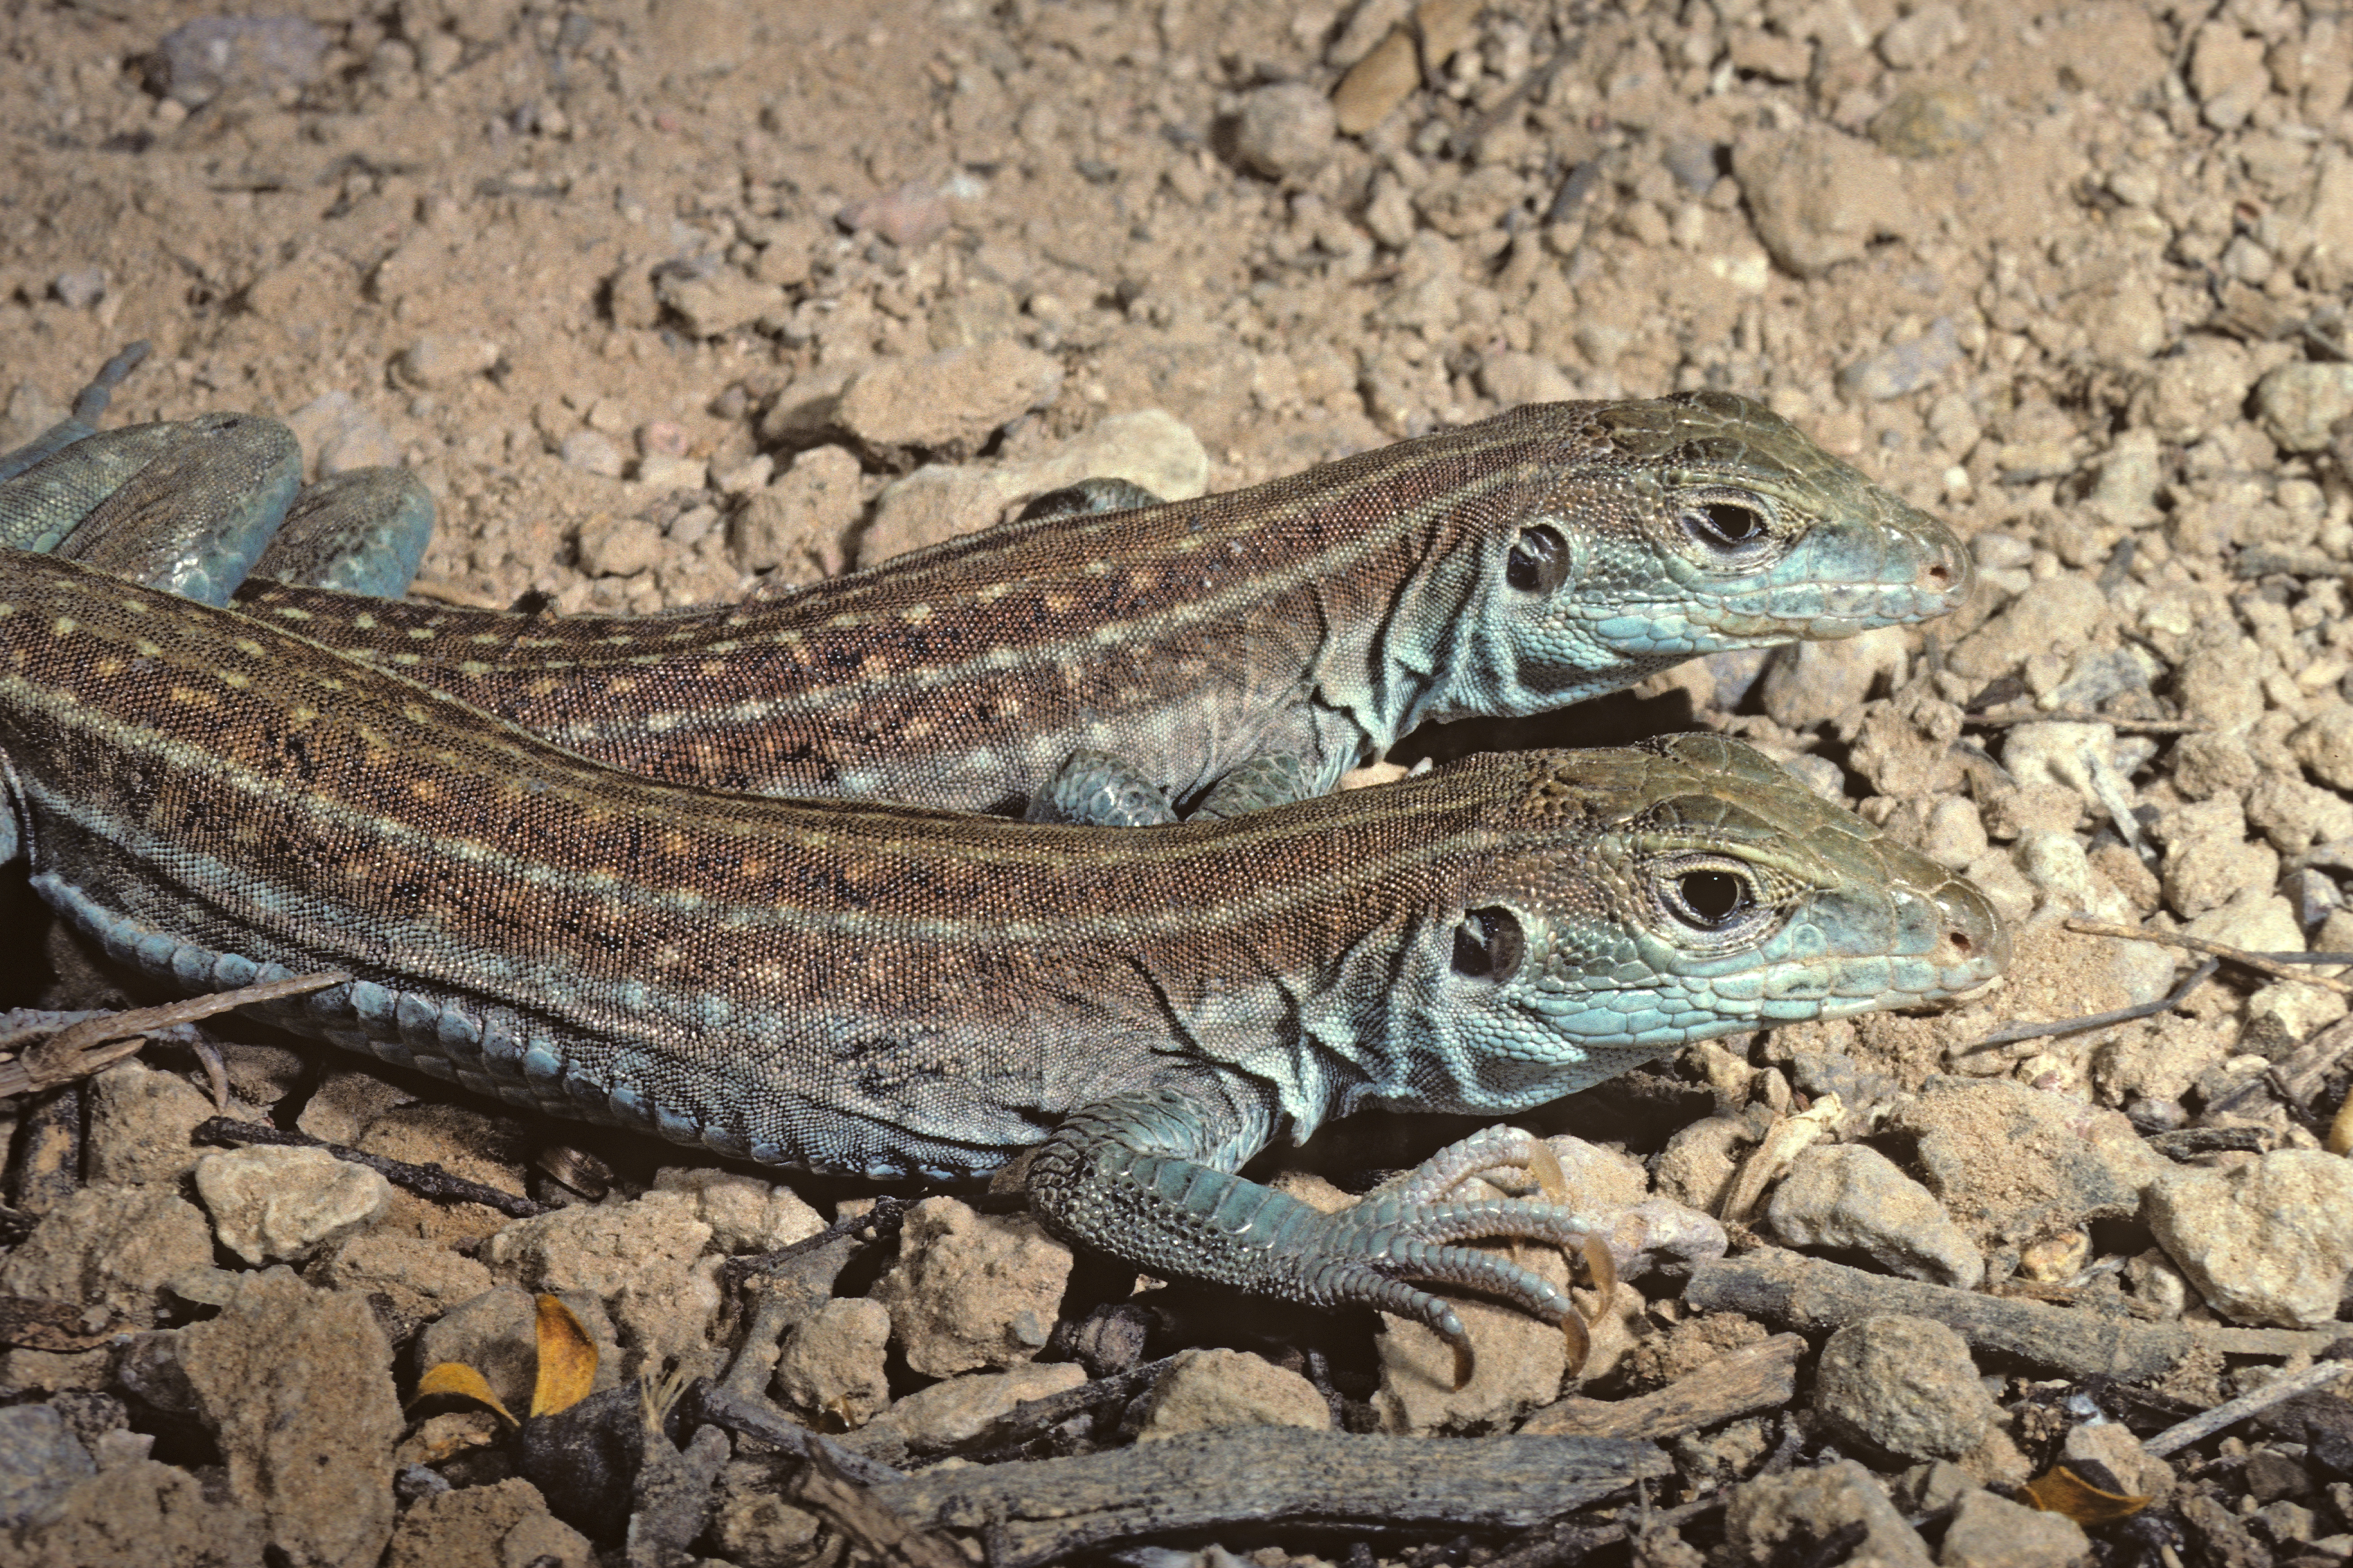 Parthenogenesis: How females from some species can reproduce without males  | Ars Technica